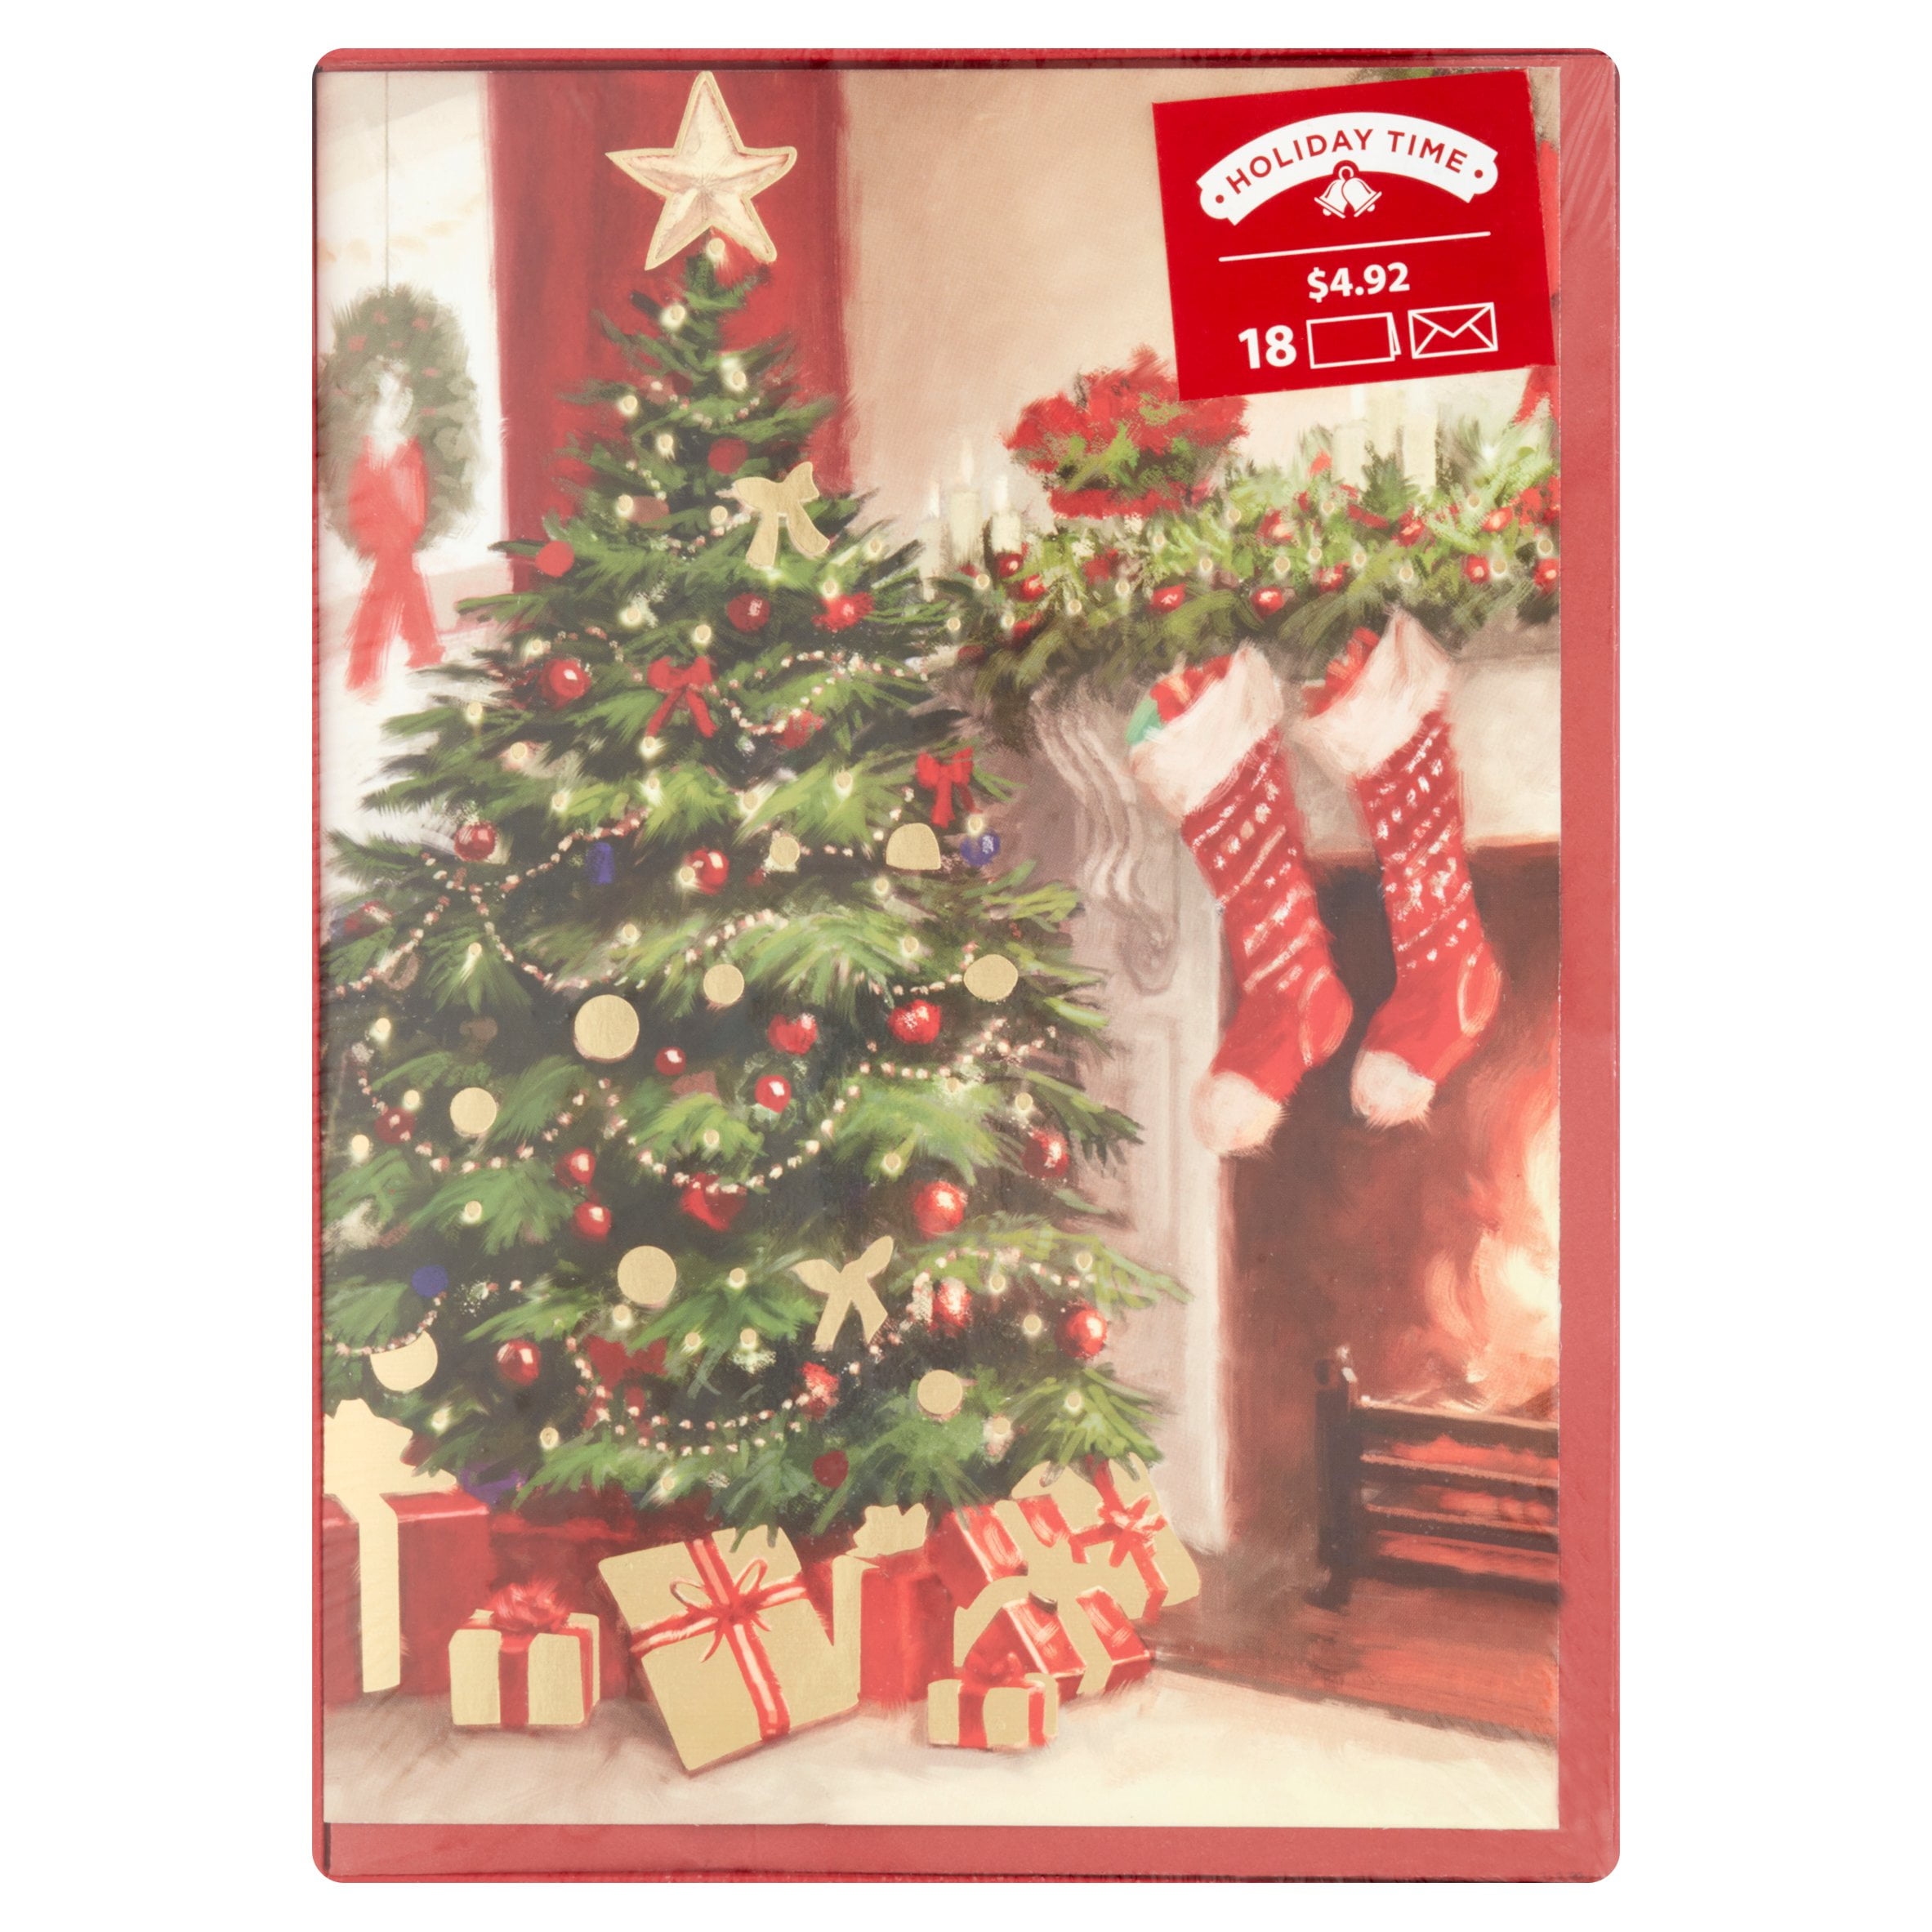 Holiday Time Christmas Cards and Envelopes, 18 count - Walmart.com